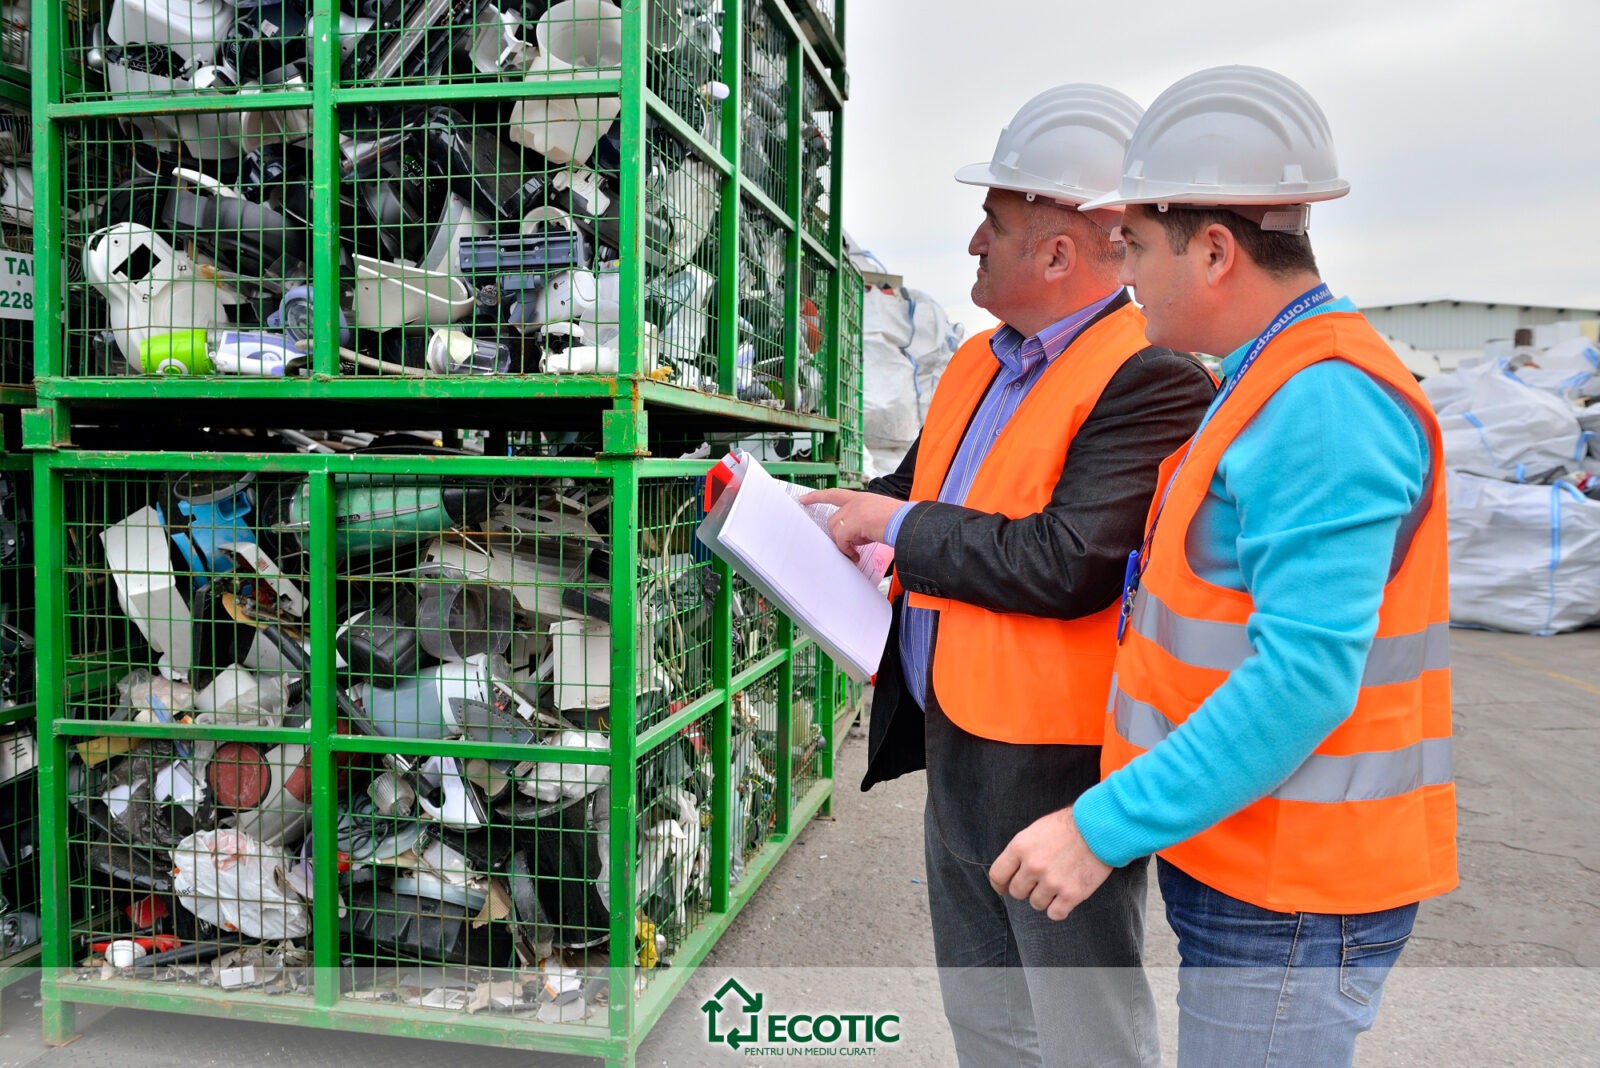 ECOTIC REPORTS 100 TONS OF ELECTRIC WASTE COLLECTED